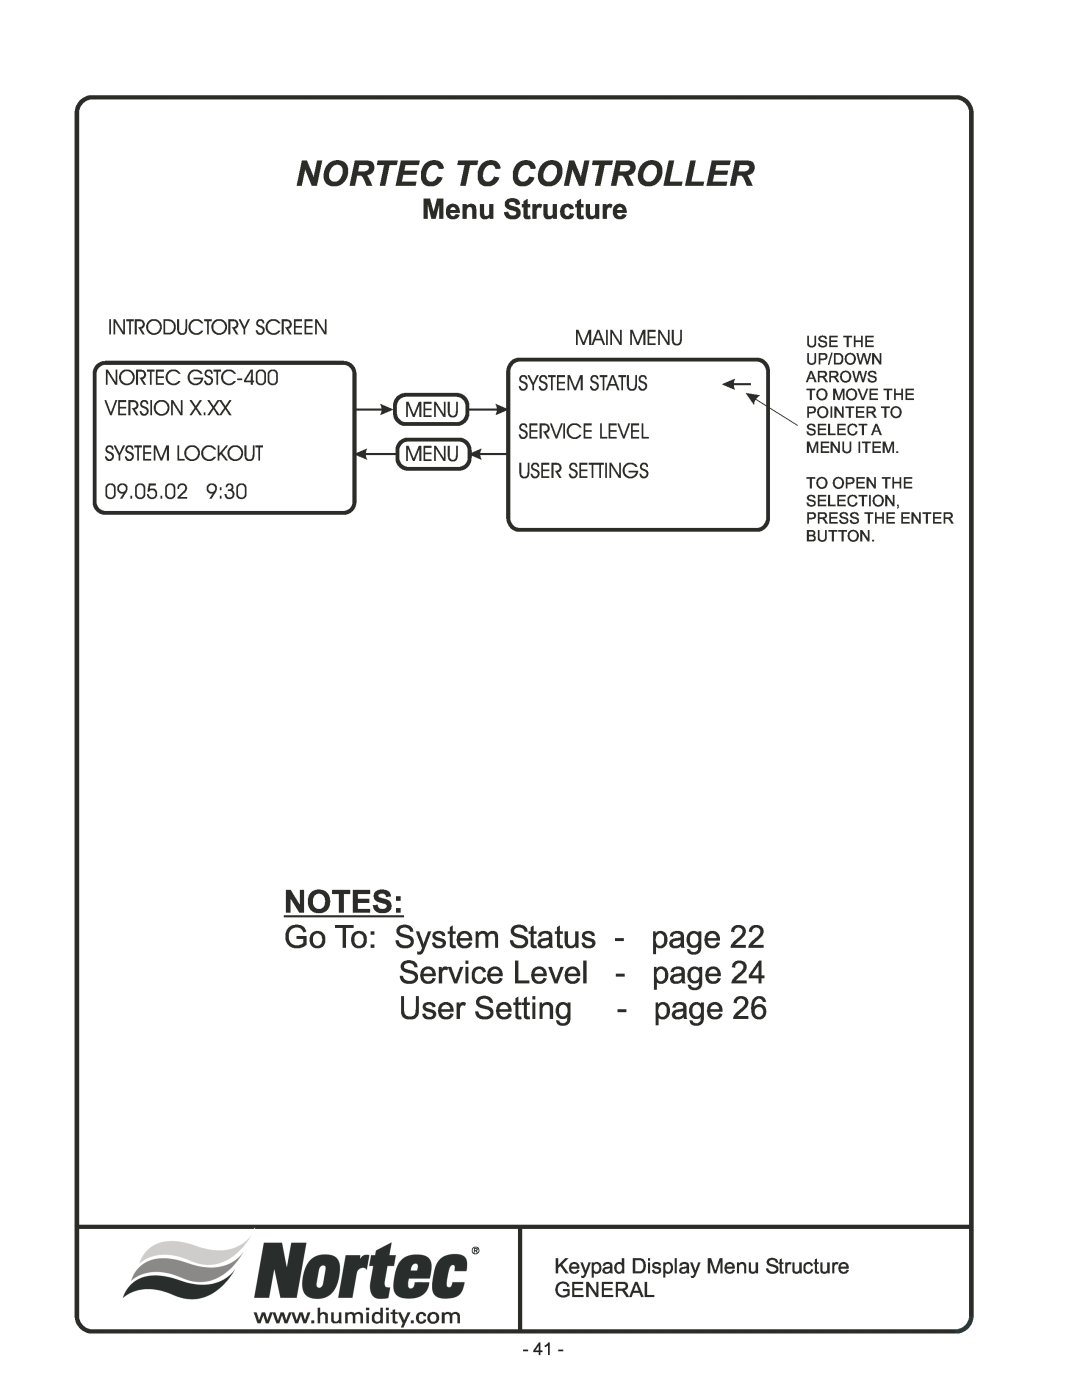 Nortec Industries GS Series Nortec Tc Controller, Go To System Status, page, Service Level, User Setting, Menu Structure 